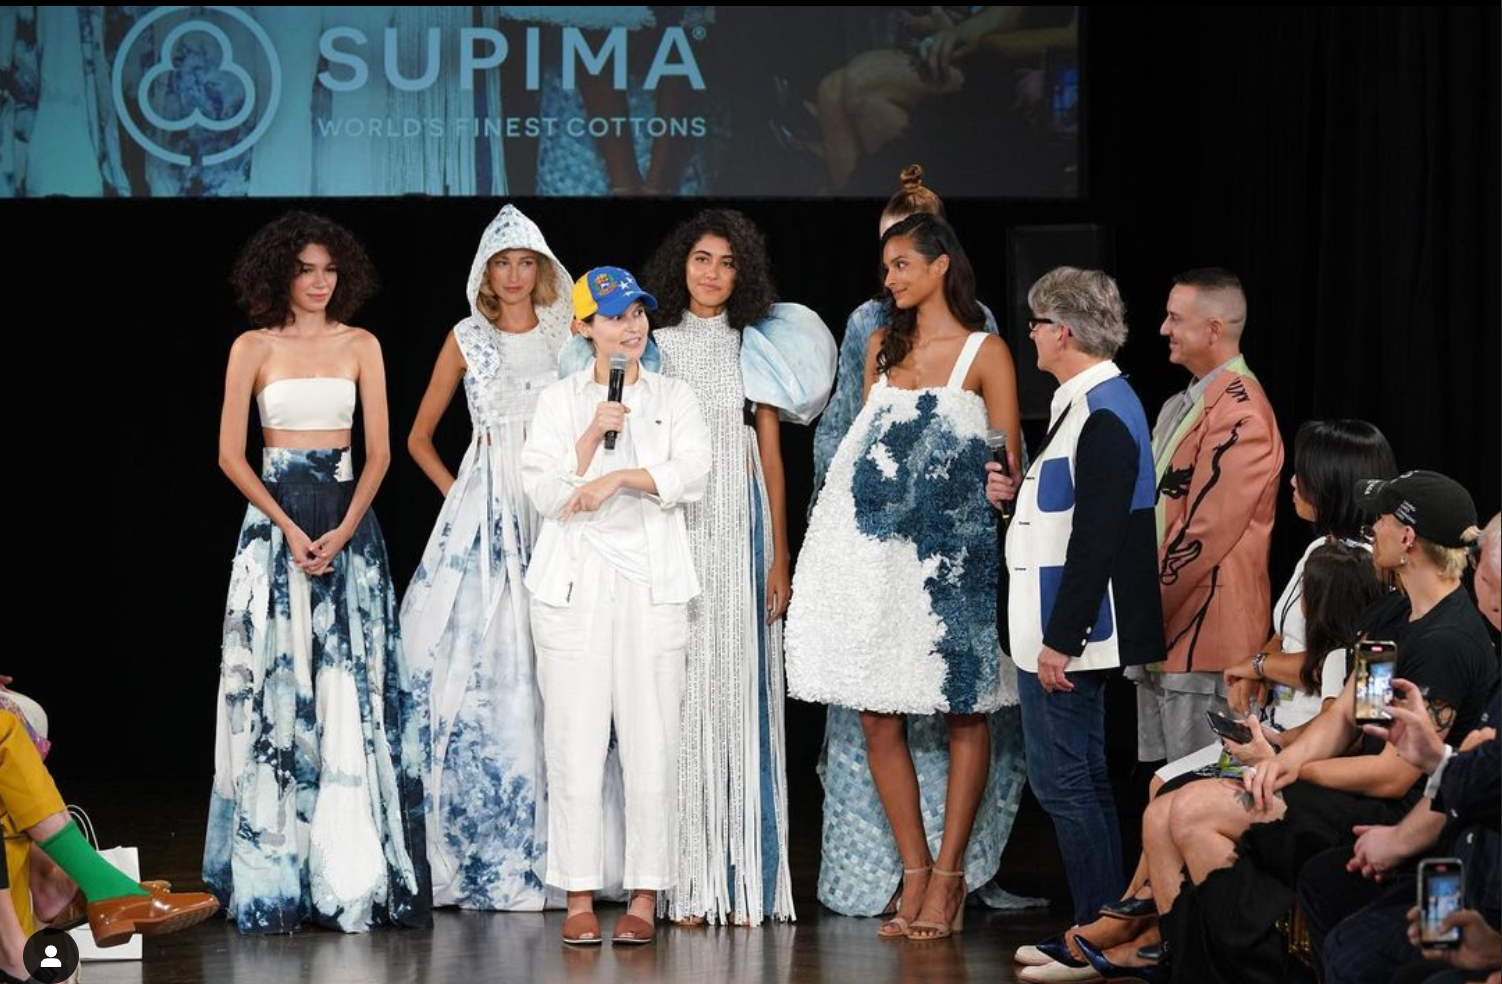 Award ceremony of fashion models and designers on a stage